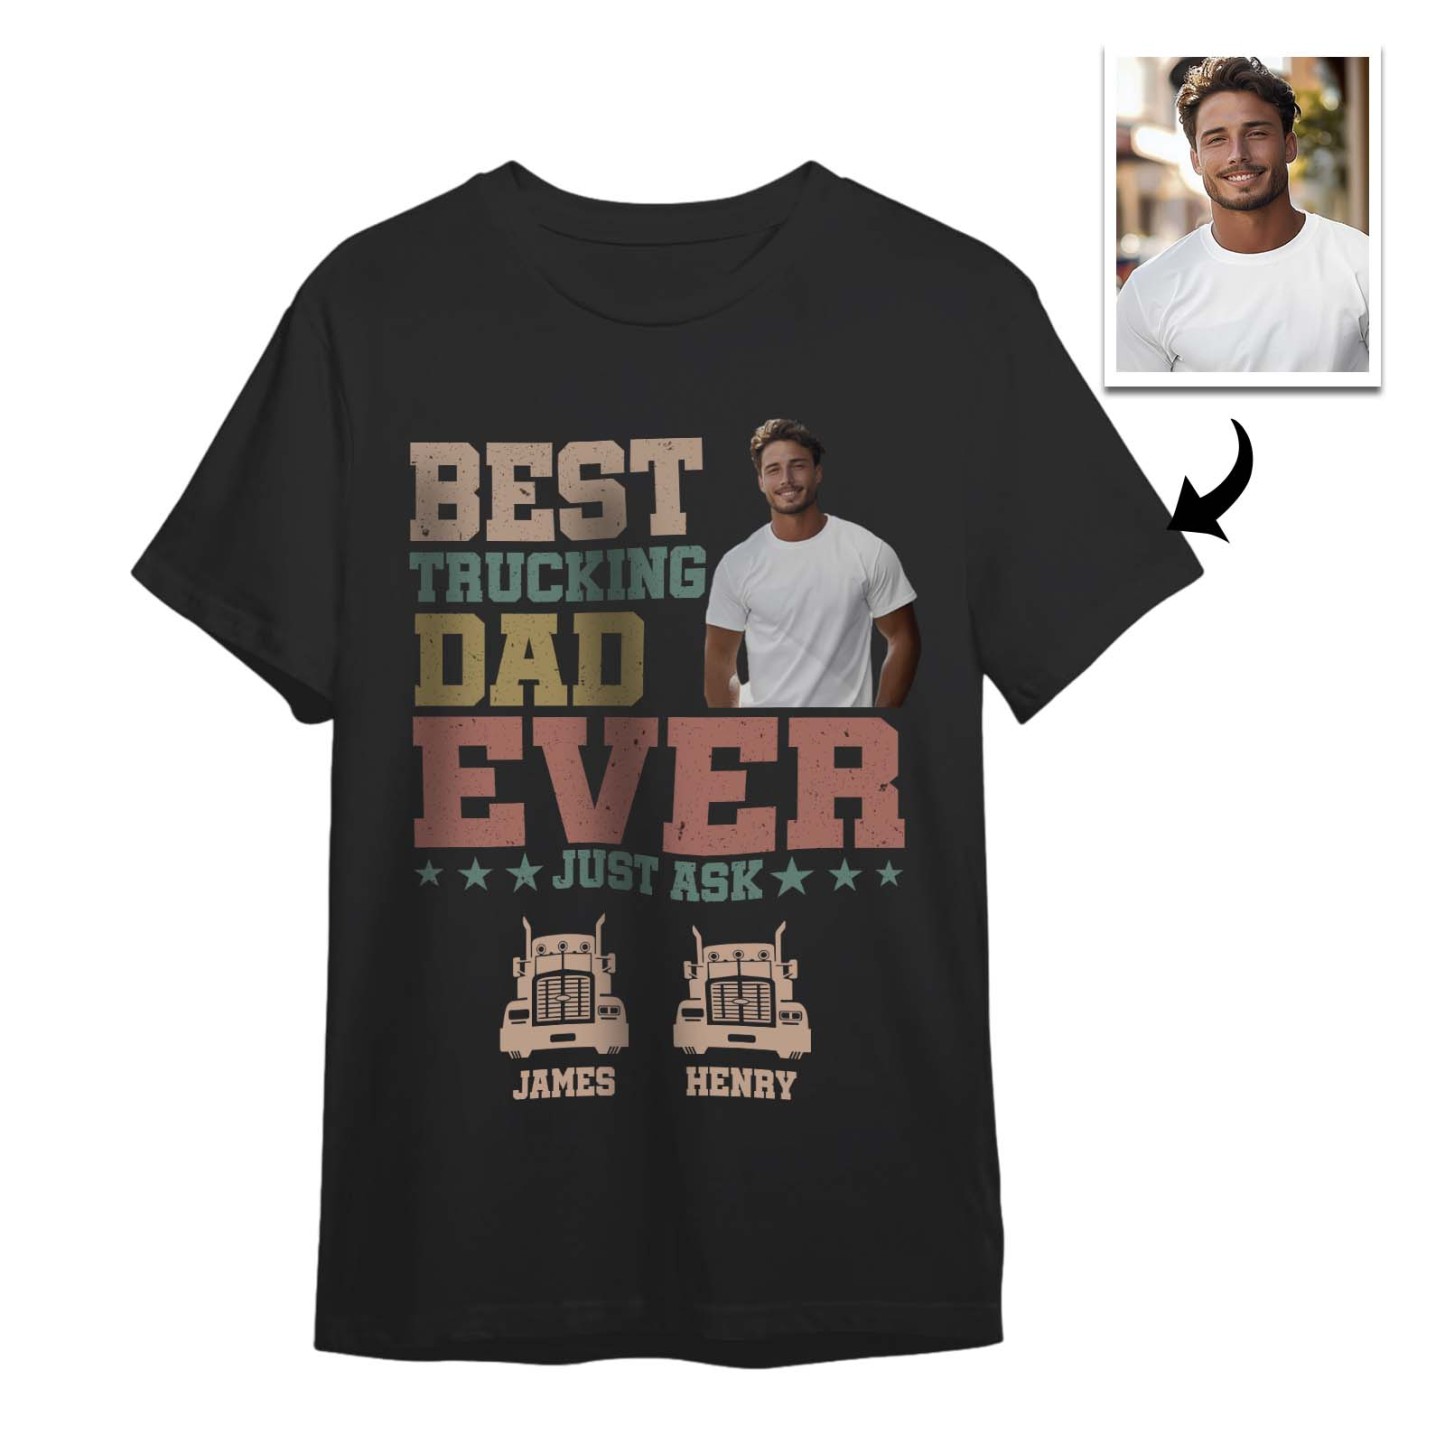 Custom Photo Text T-Shirt Personalized T-Shirt With Best Dad Ever Father's Day Gift